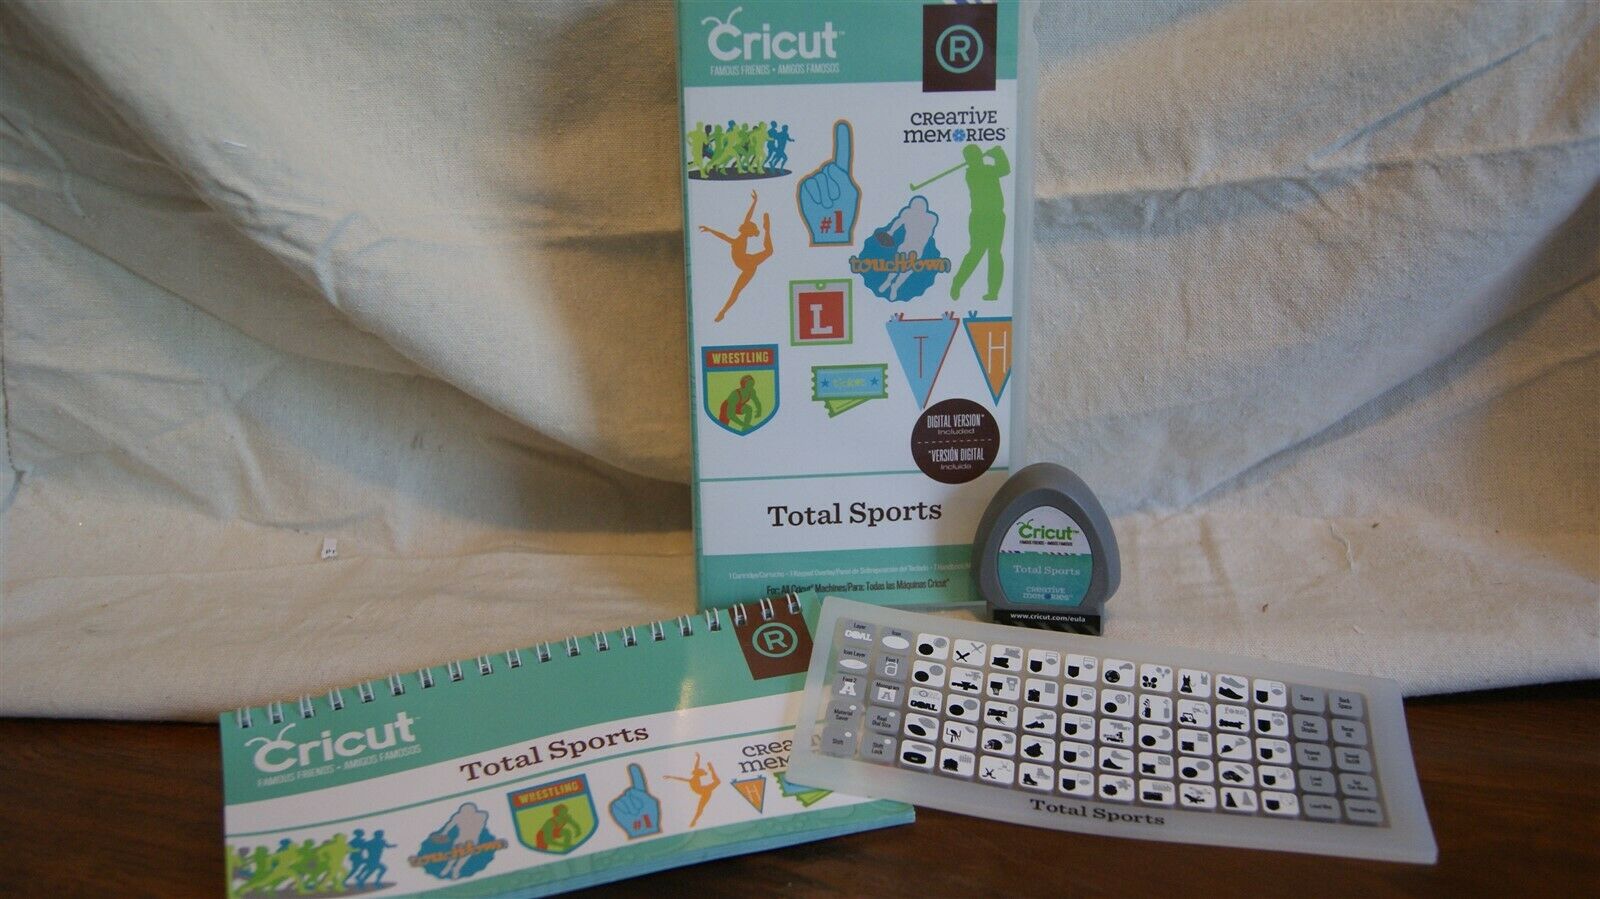 Cricut Cartridge - TOTAL SPORTS - Used - Complete! CREATIVE MEMORIES -NOT LINKED